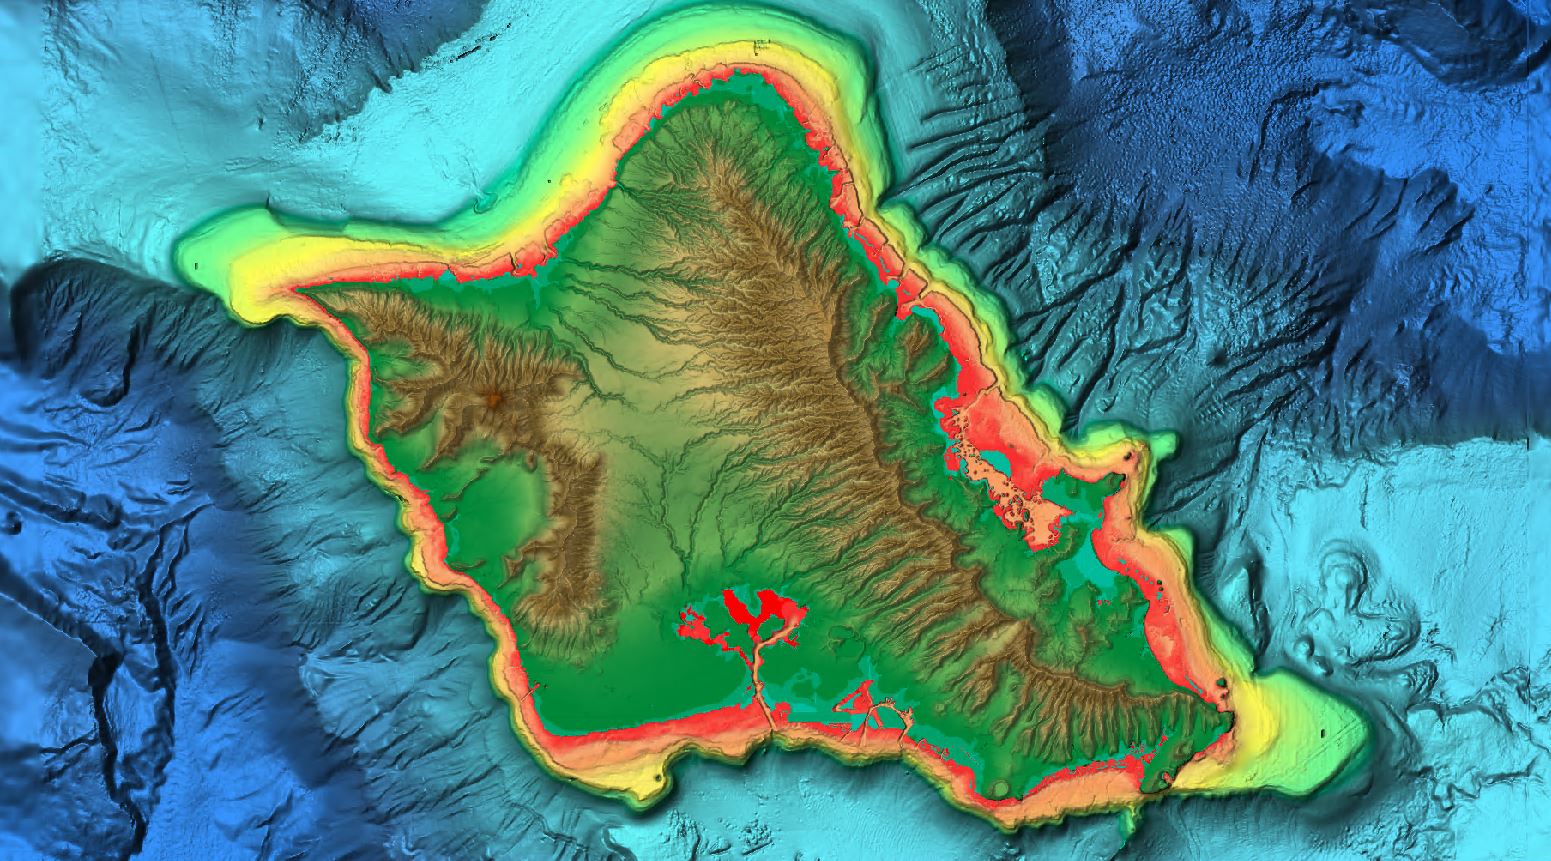  C-MAP - Shaded Relief - Hawaii Reveal